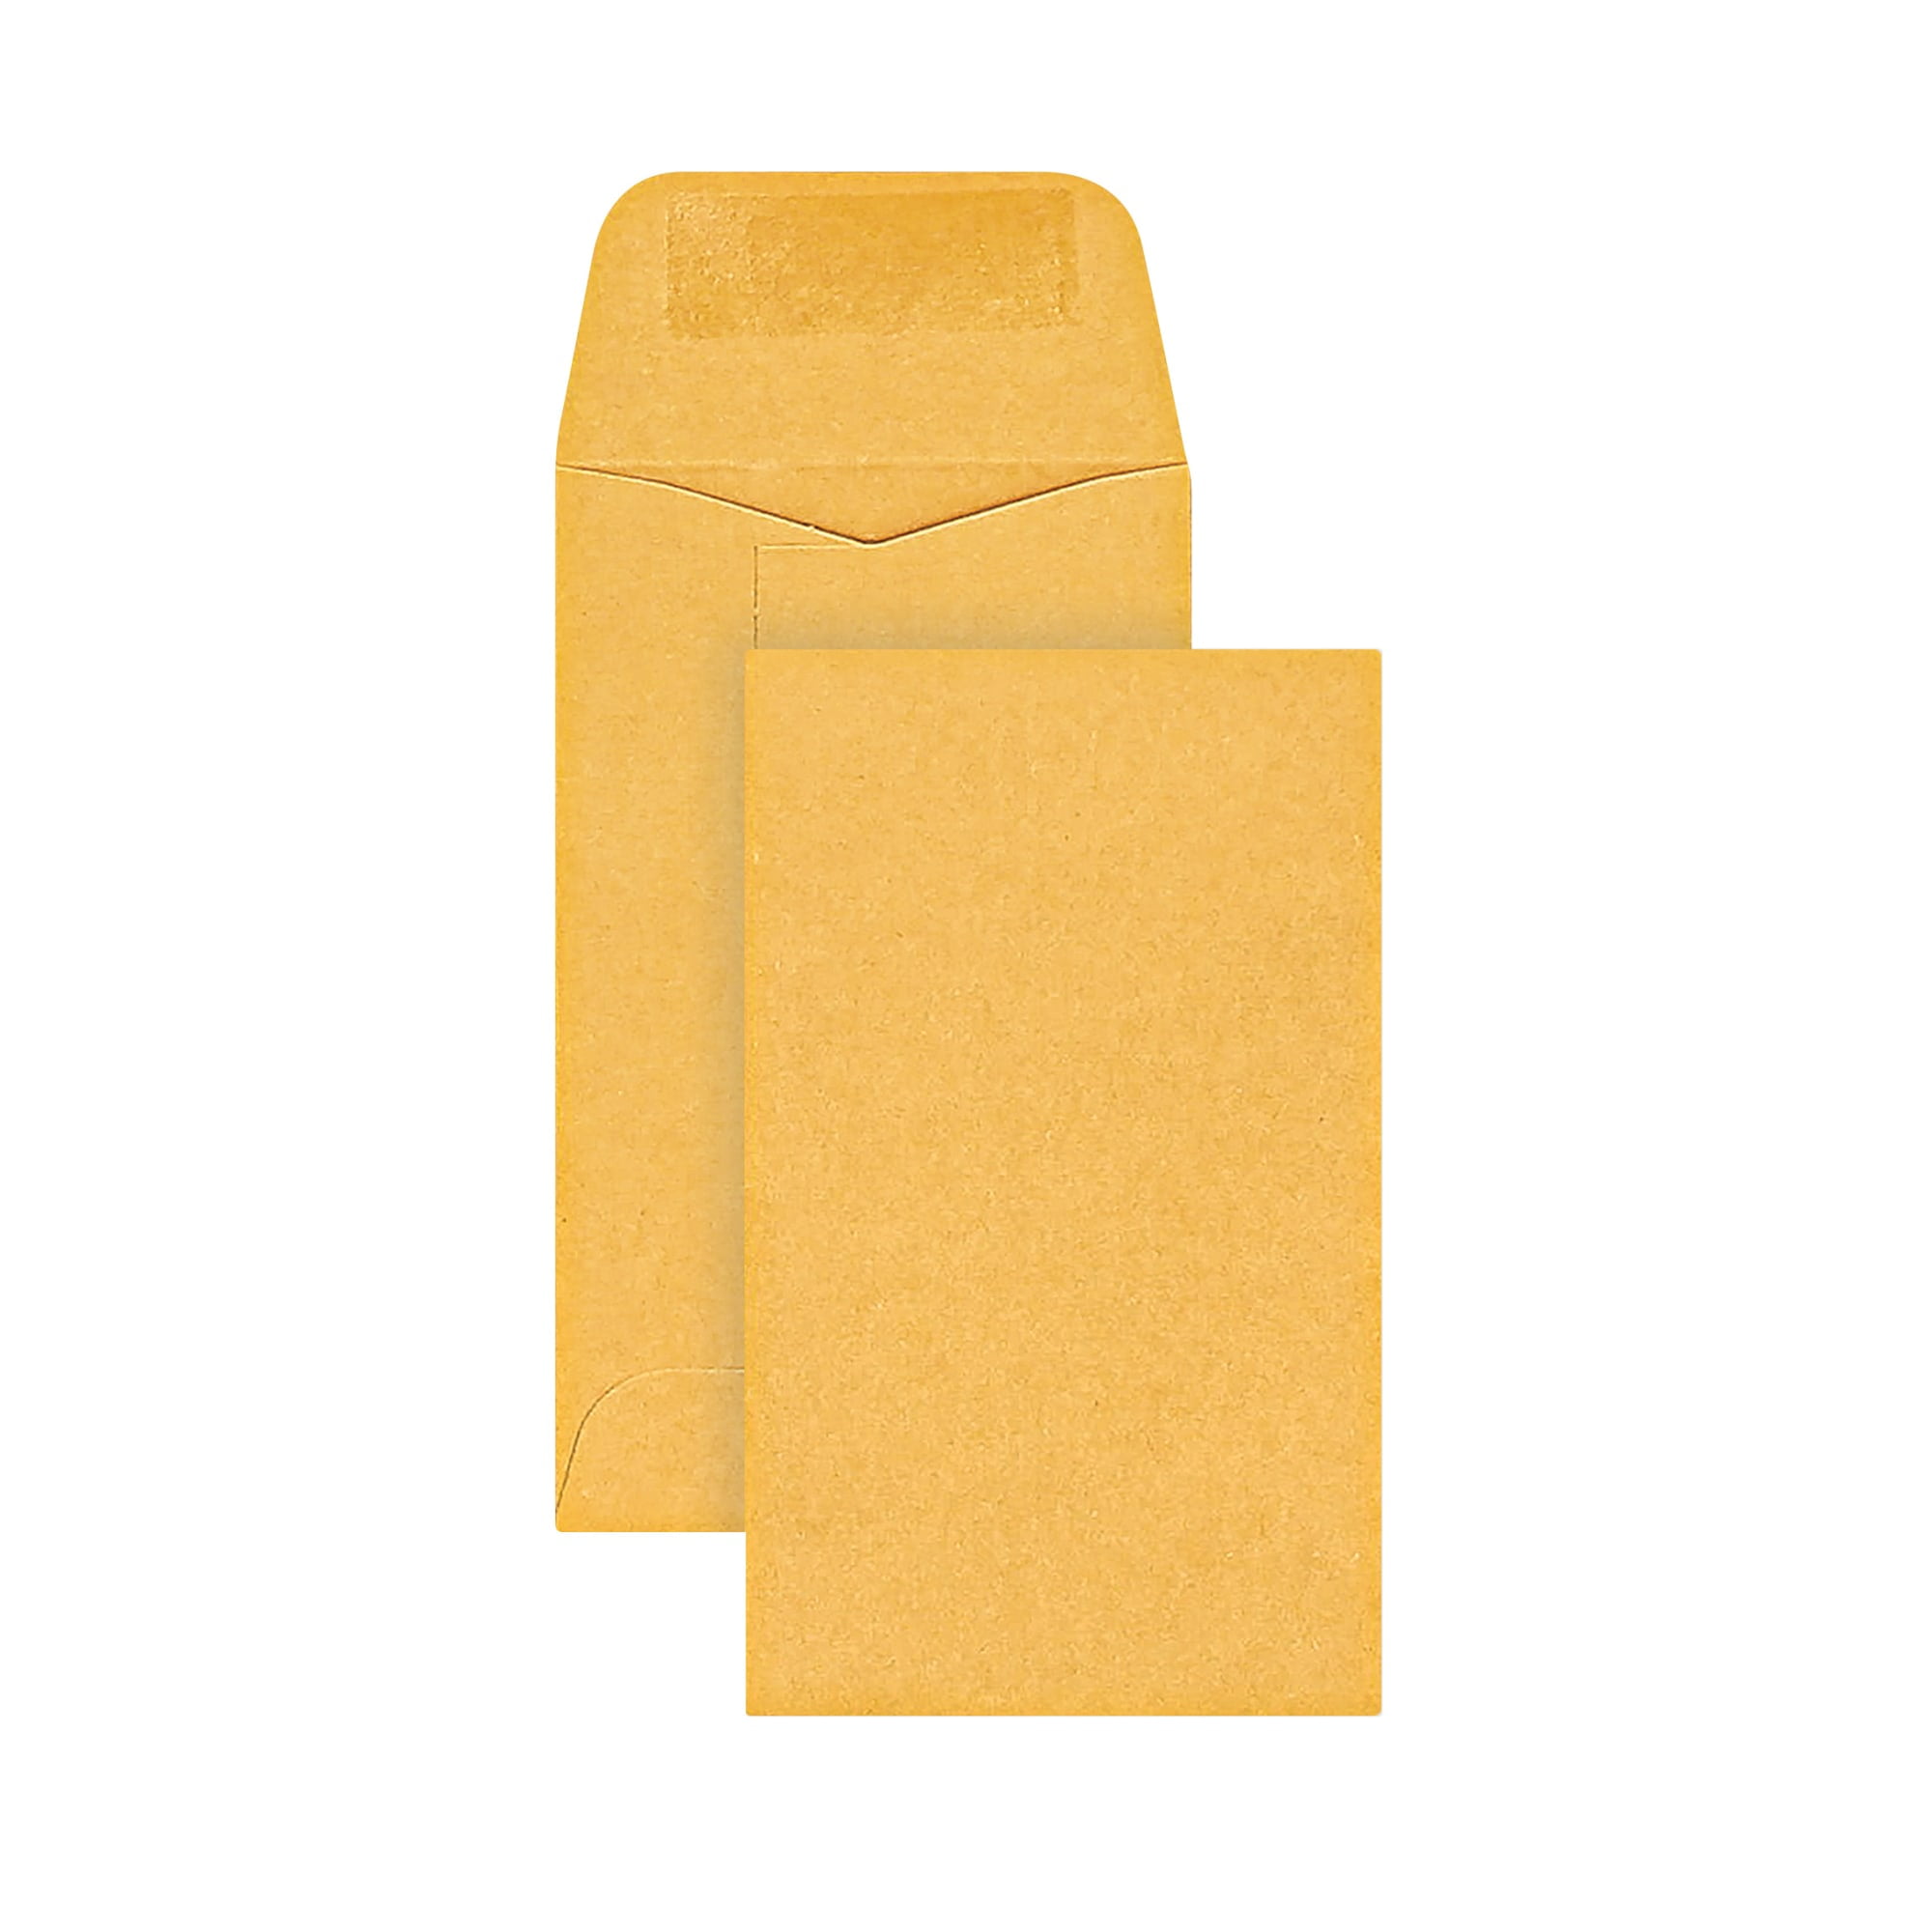 50 UNIVERSAL KRAFT COIN ENVELOPES #1 SIZE 2.25" BY 3.5" WITH GUMMED FLAP 